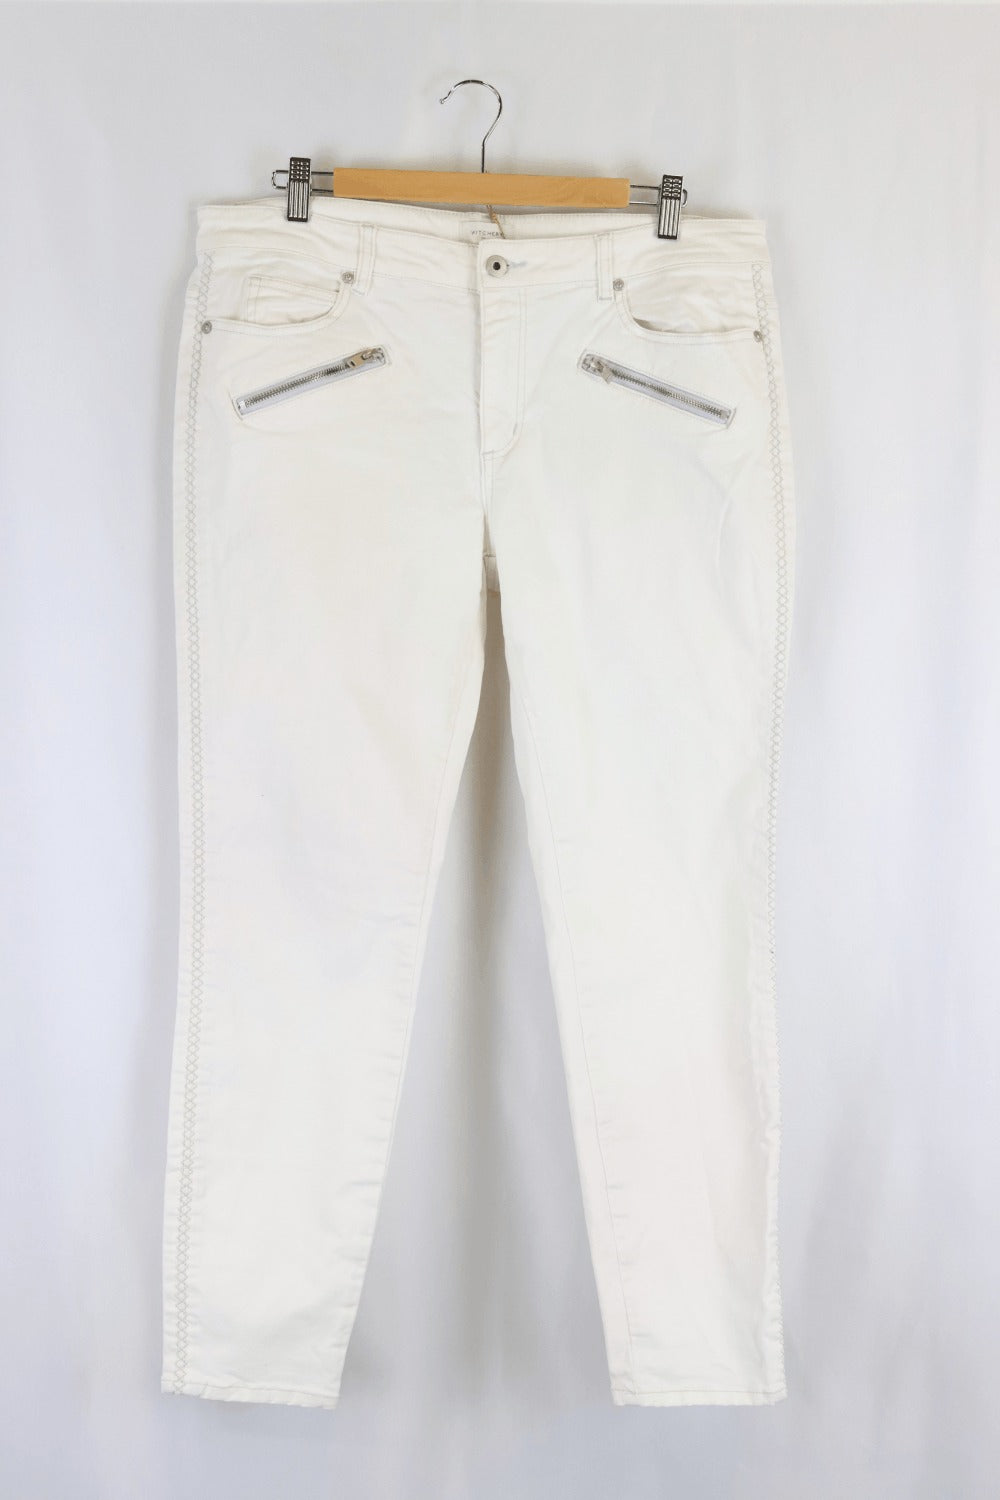 Witchery White Jeans 16